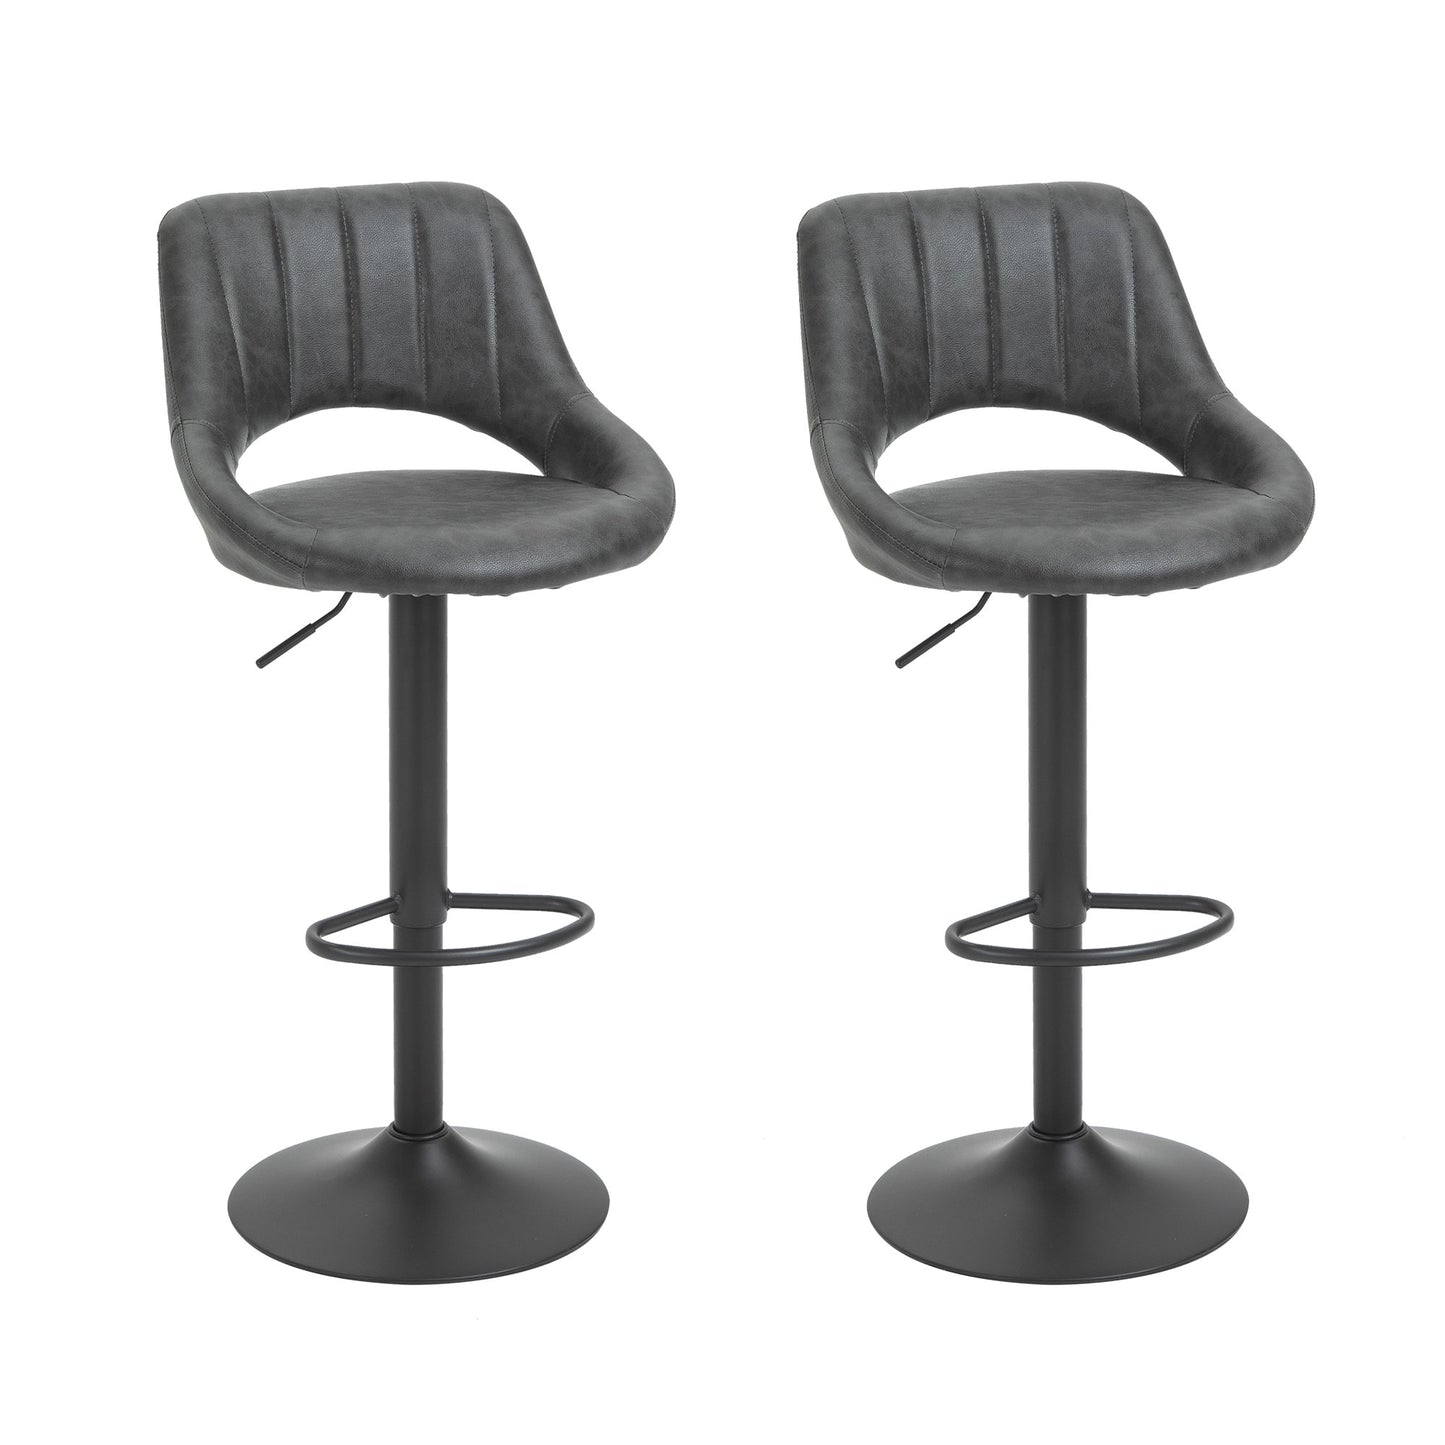 HOMCOM Barstools Set of 2 Adjustable Swivel Height PU Leather Counter Chairs Footrest